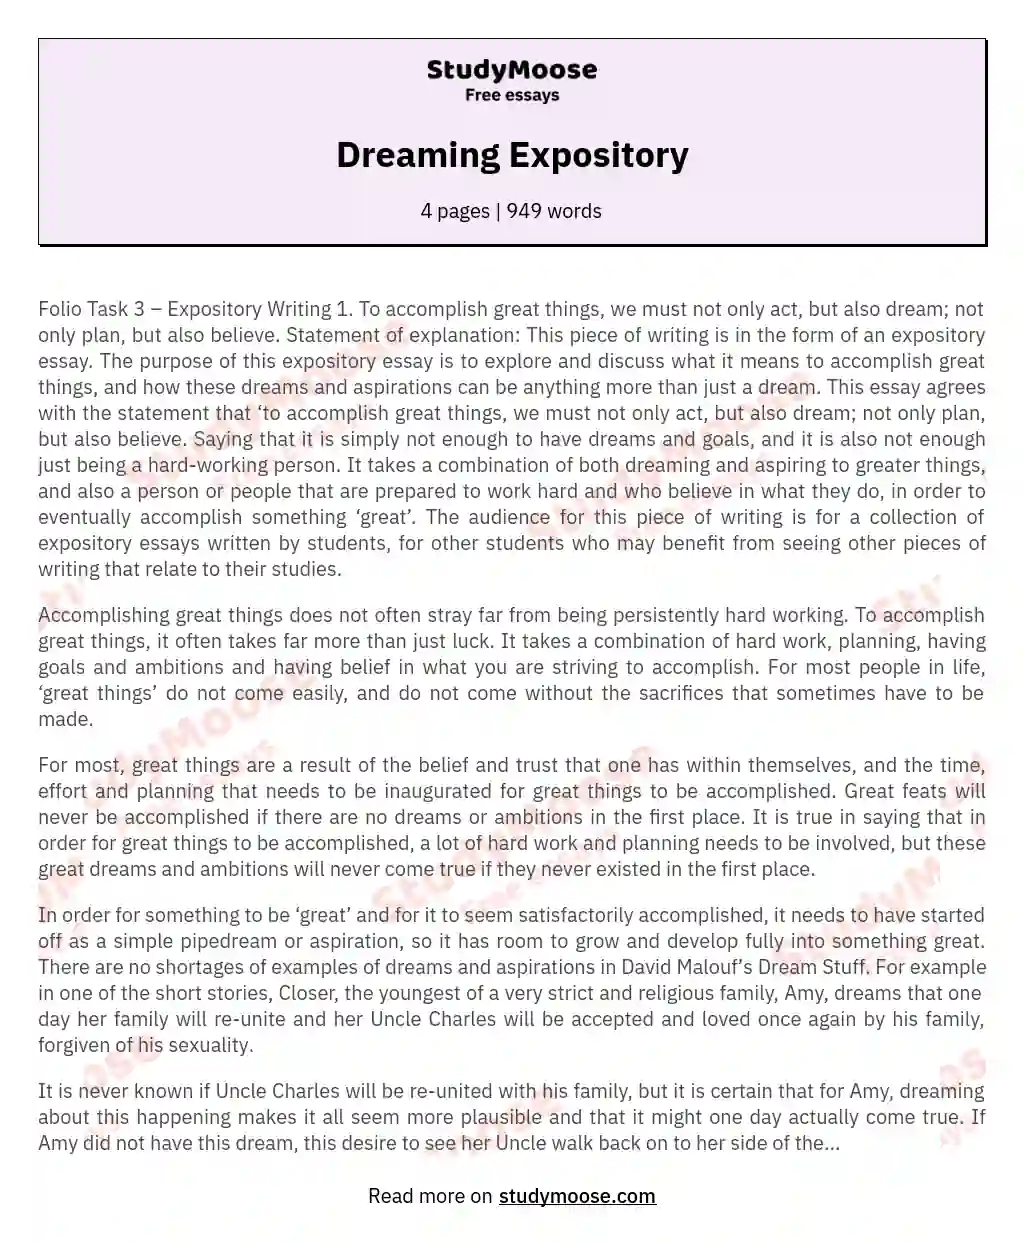 Dreaming Expository